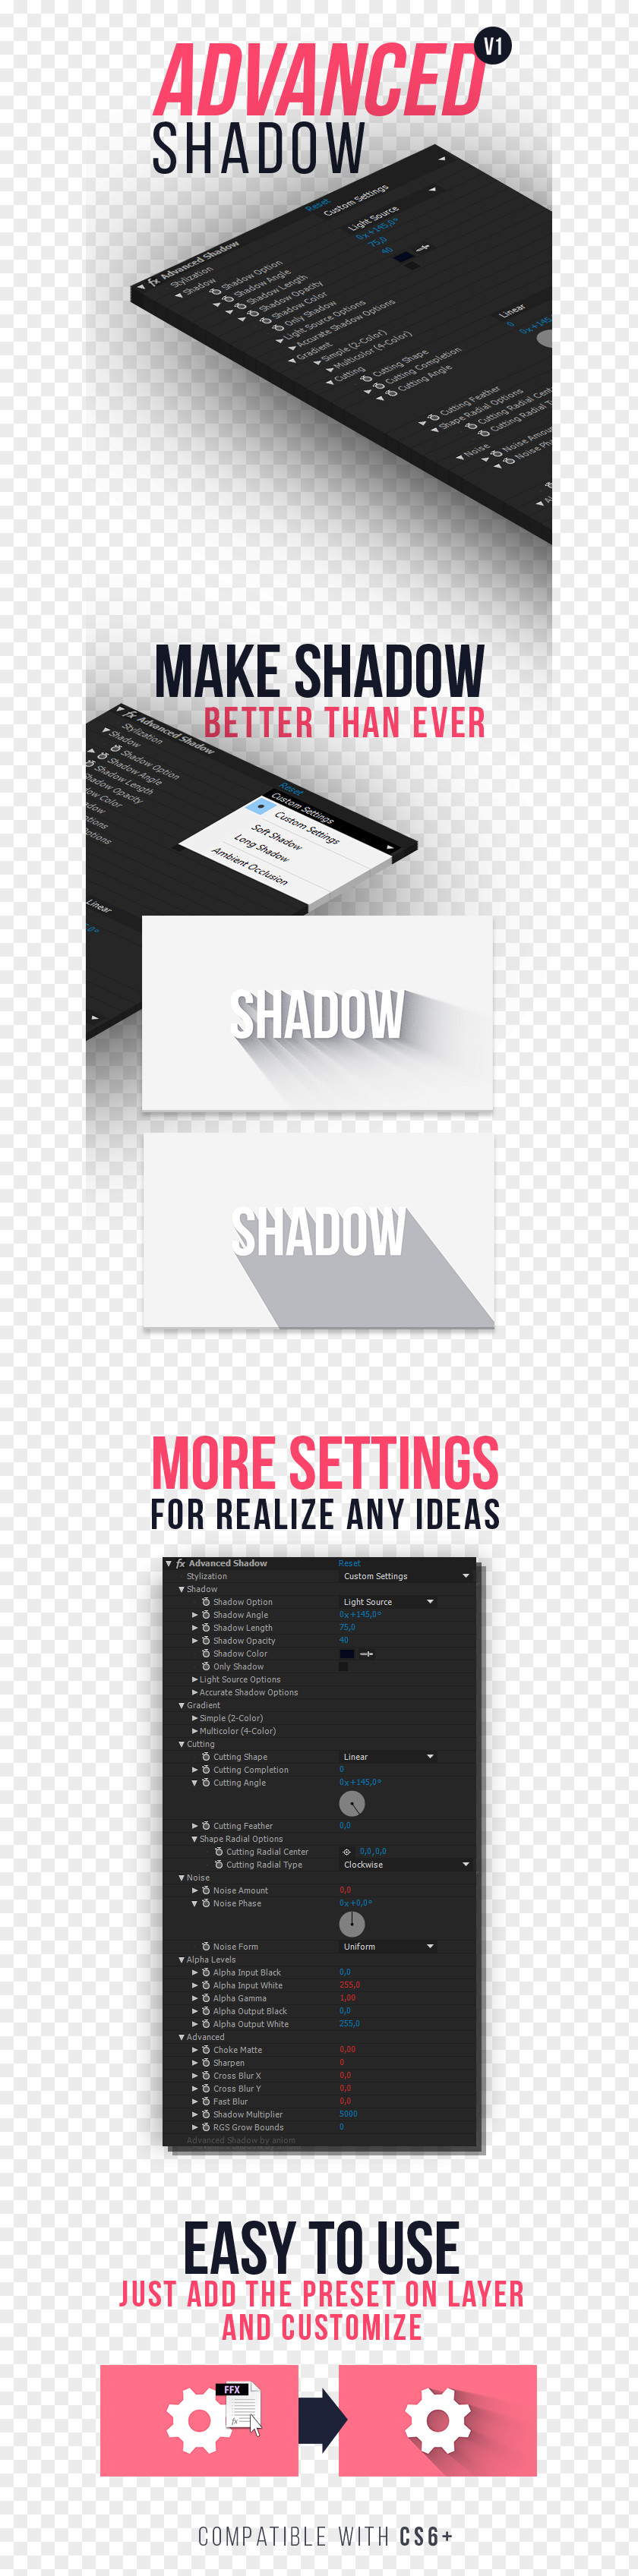 Light Adobe After Effects Shadow Plug-in MacOS PNG